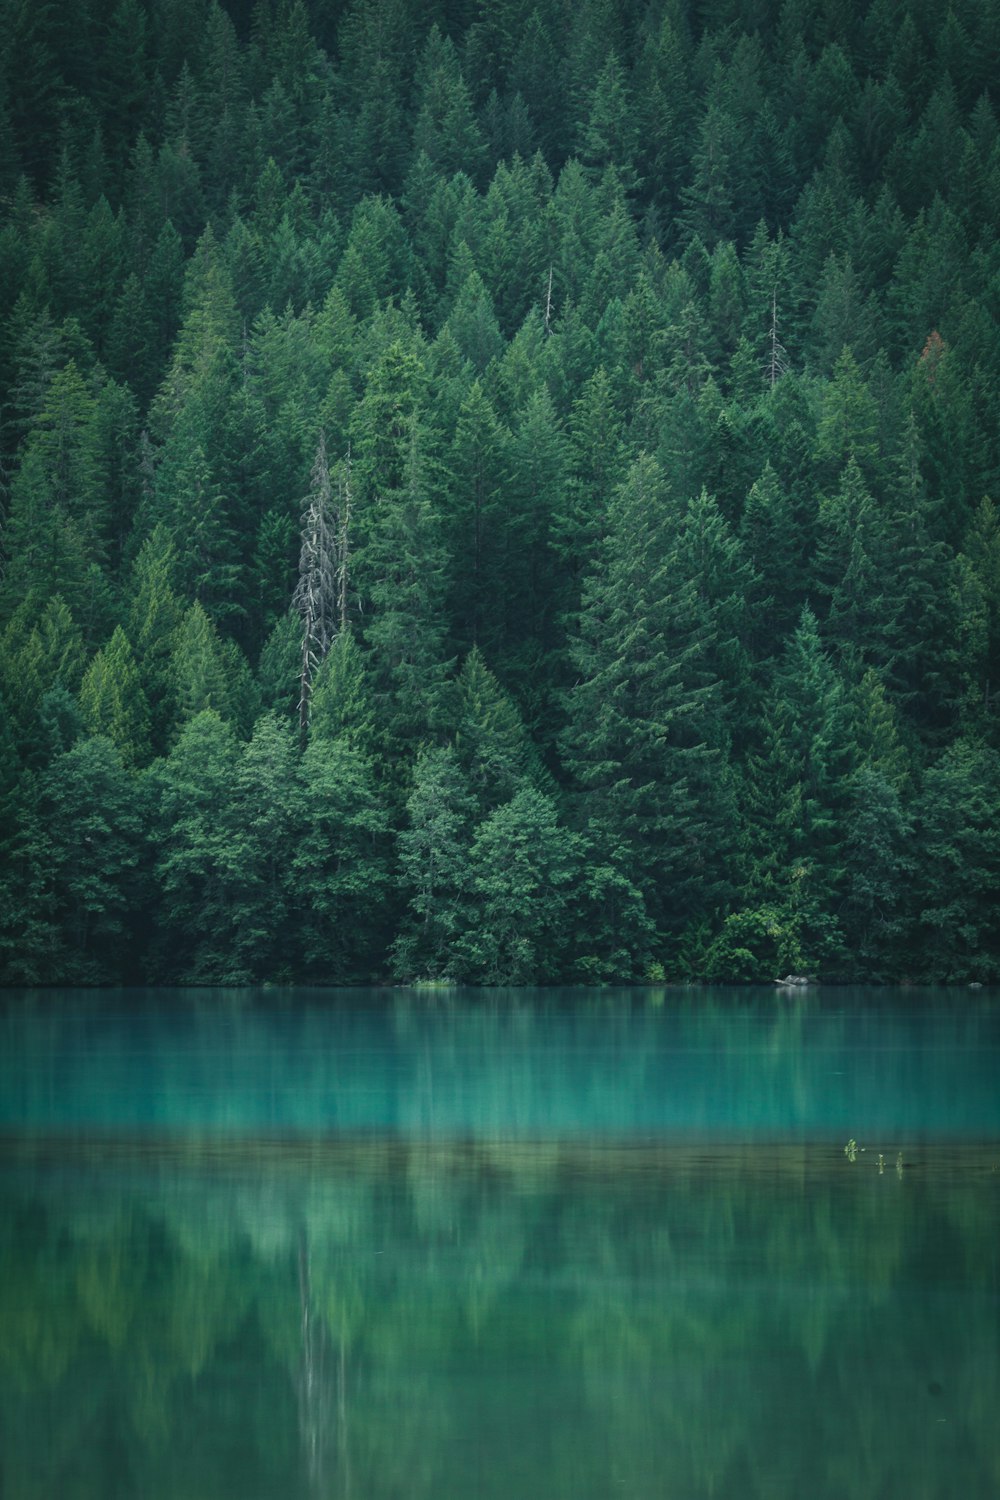 green leaf trees across calm body of water